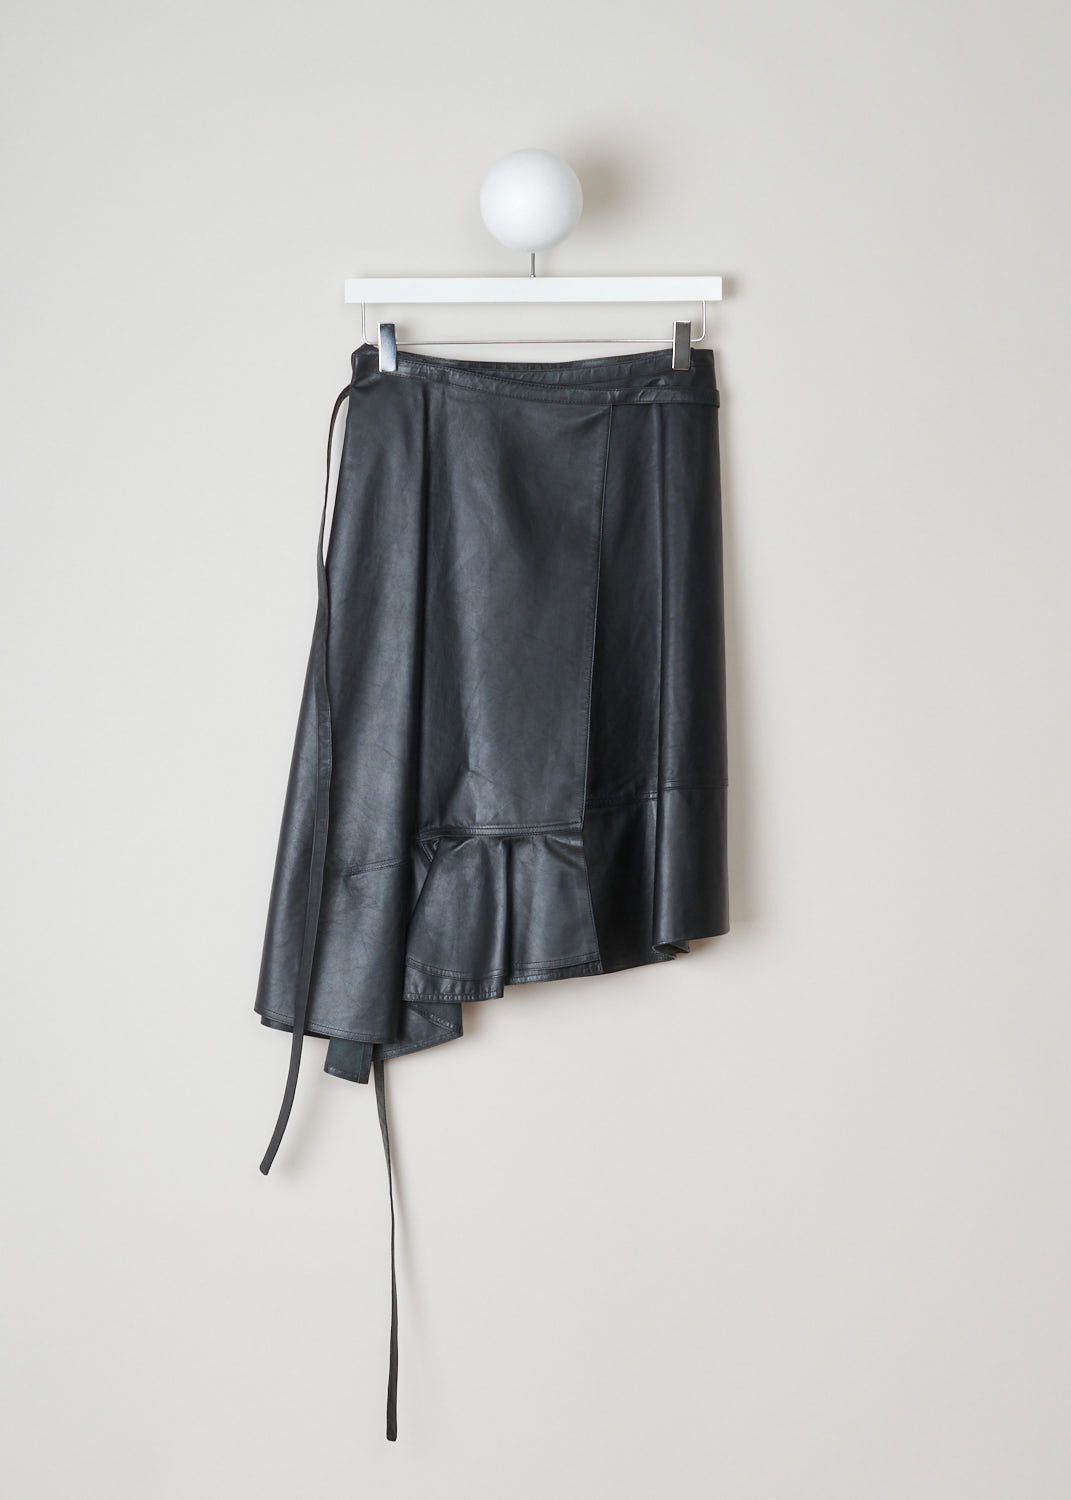 CÃ©line, Asymmetrical black leather wrap skirt, 045A_22081_ONO_C01, black, front, Wrap skirt crafted in calf leather, the softest kind of leather. This model features a backing button on the inside. Beside that, it has two leather ribbons that can be used as fastening option, or can be tied in various decorative knots. Furthermore, this model has concealed pockets on the side seam.